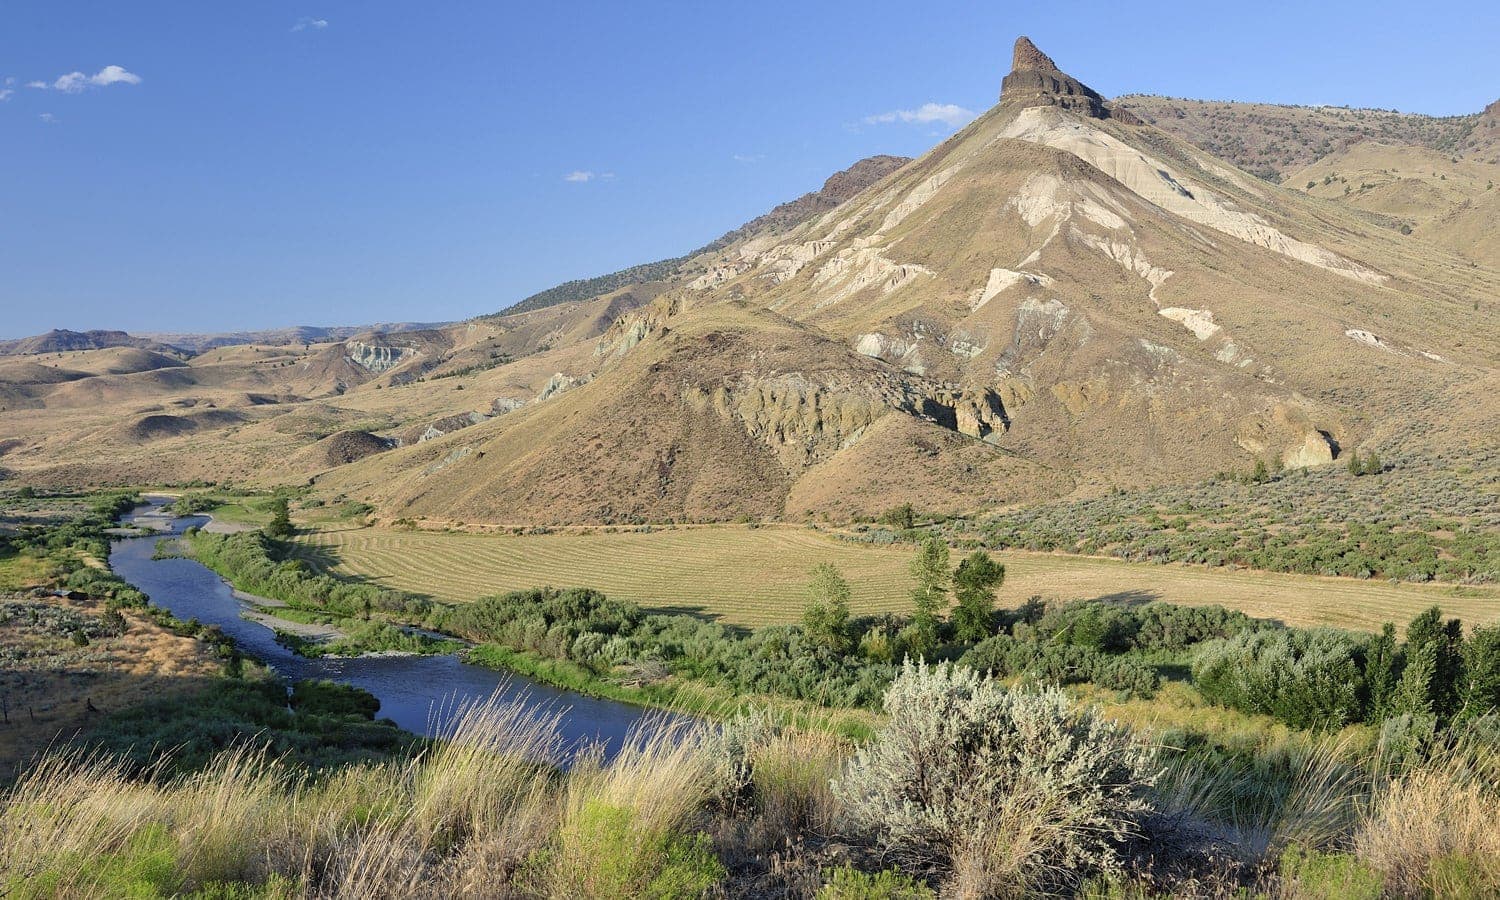 Sheep Rock Unit, John Day Fossil Beds National Monument